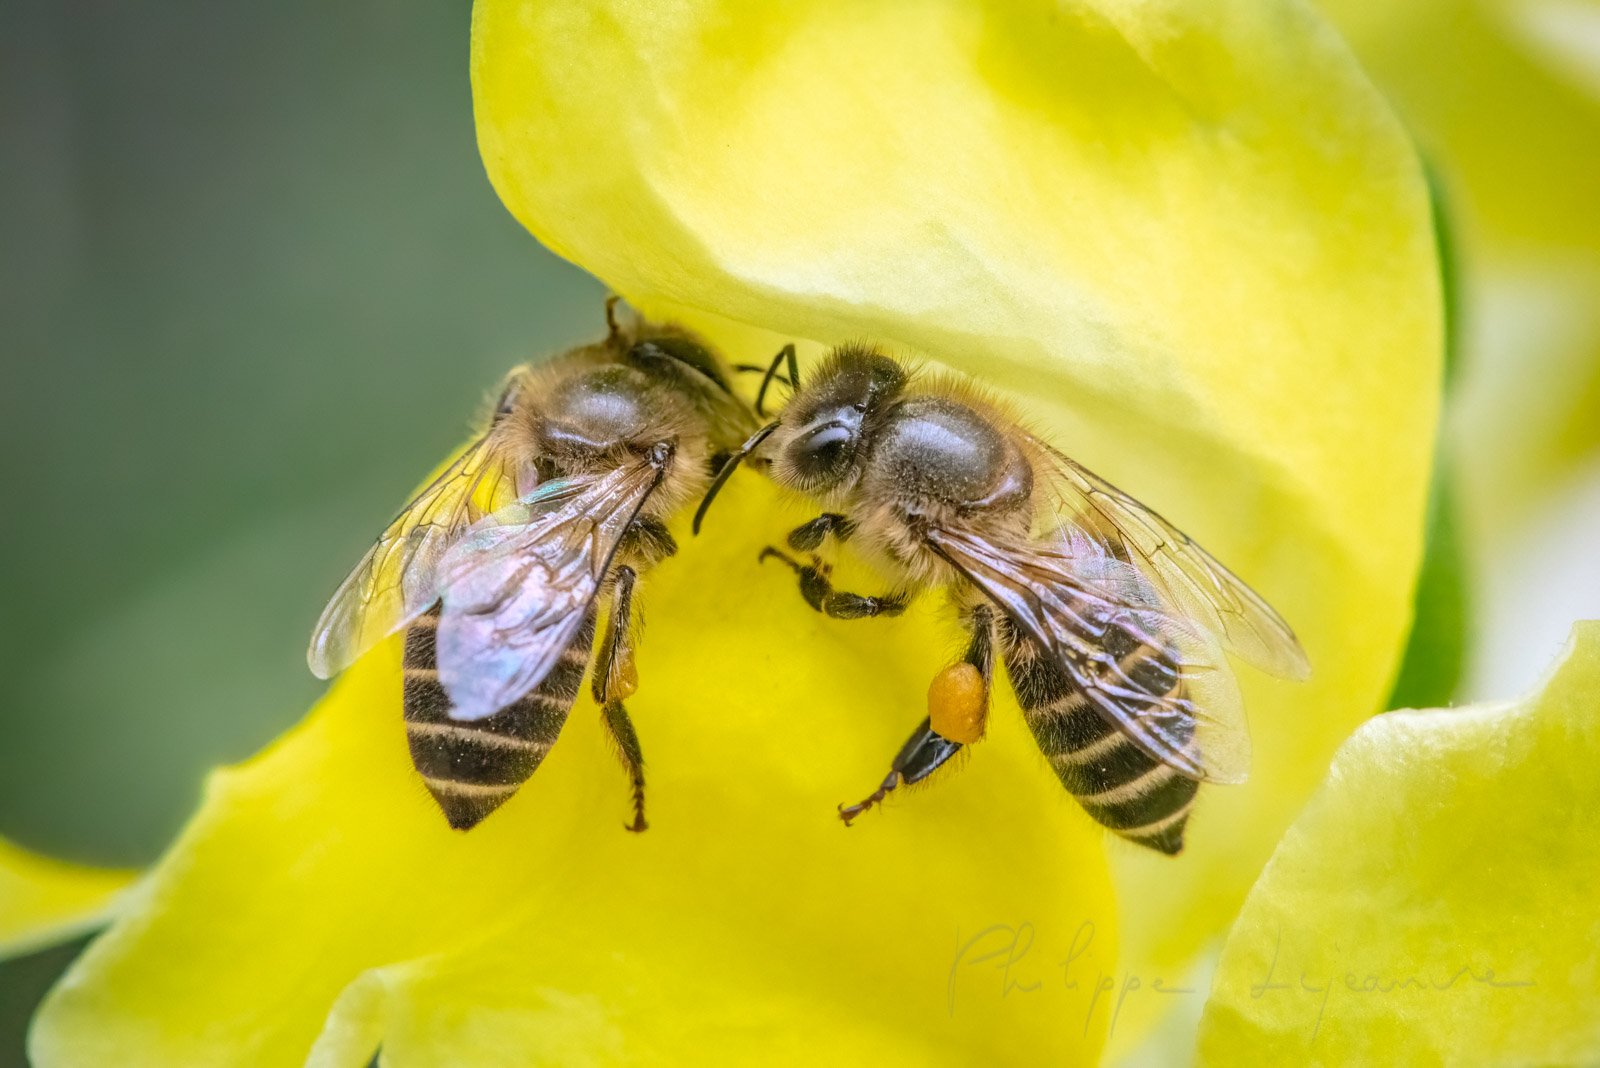 Honey bees on a yellow flower close-up view in Chengdu, Sichuan province, China